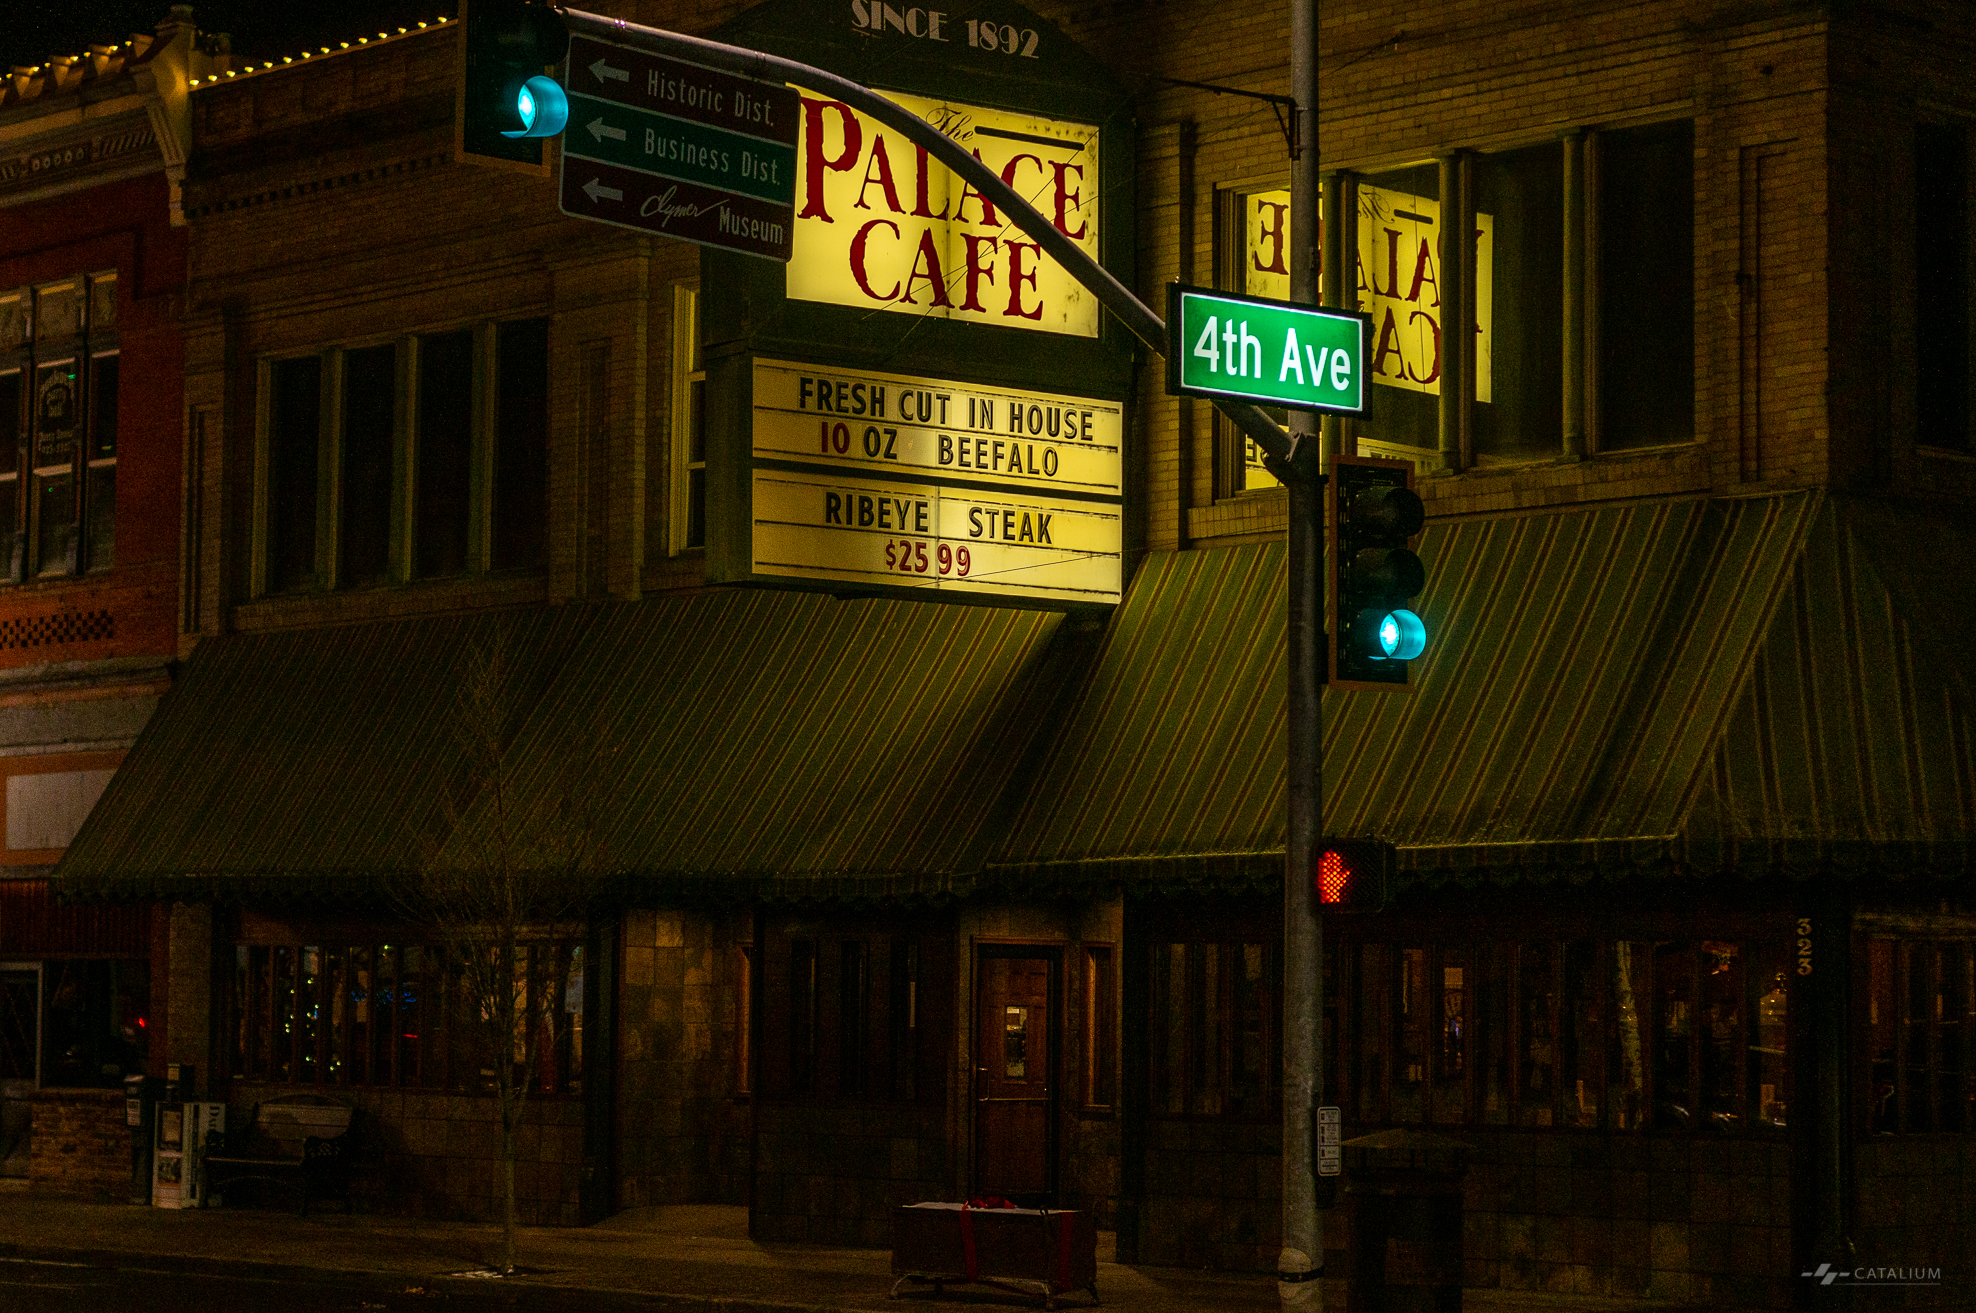 The Palace Cafe in Ellensburg, WA